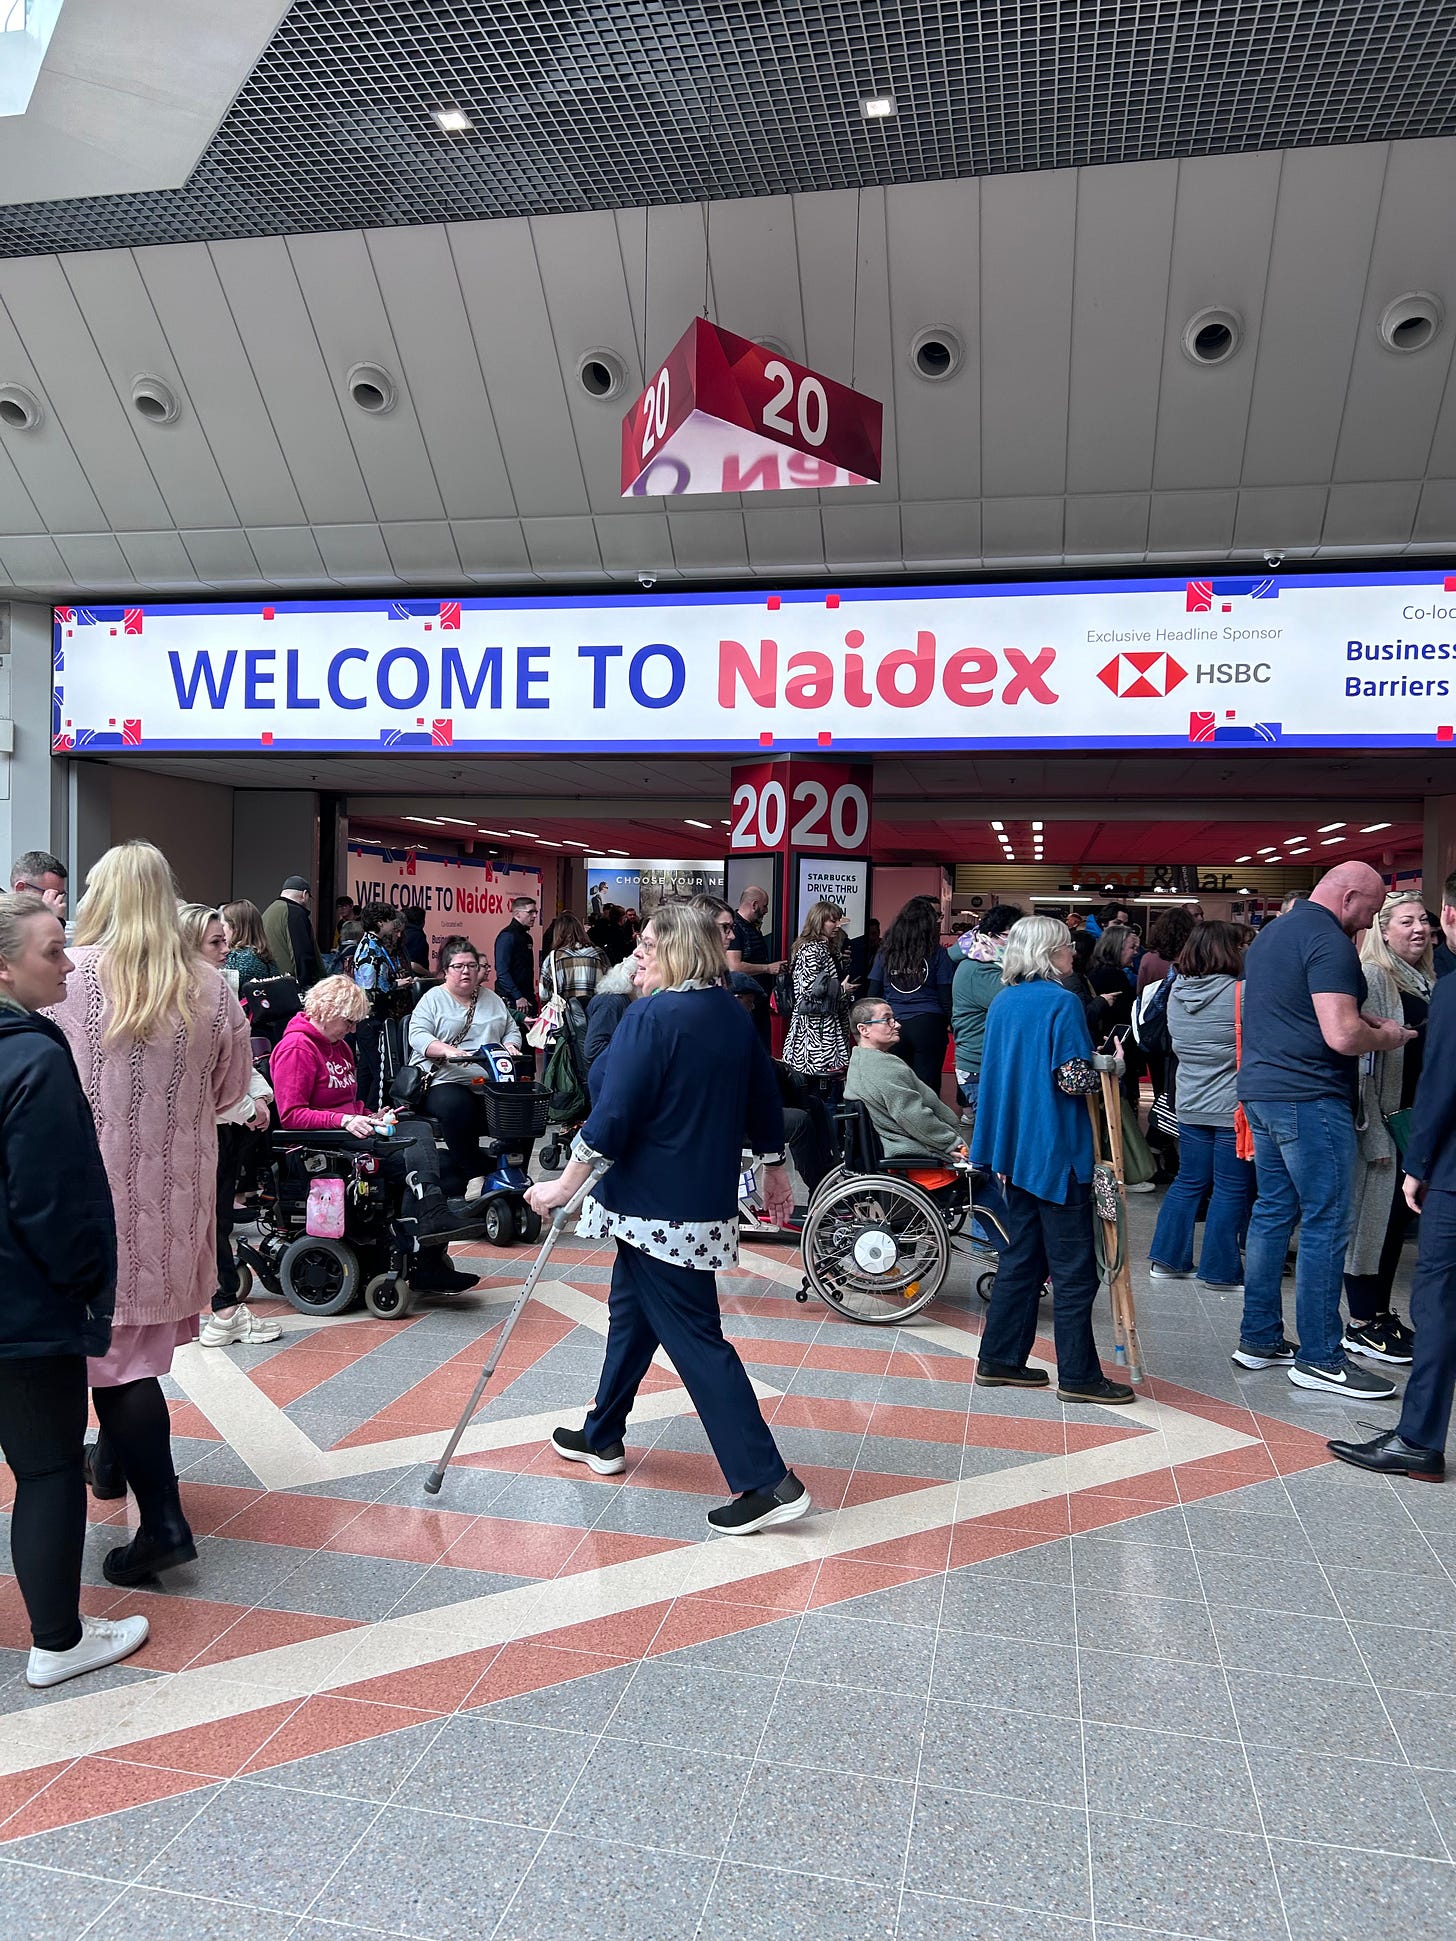 A shot of the entrance to Naidex on day one 